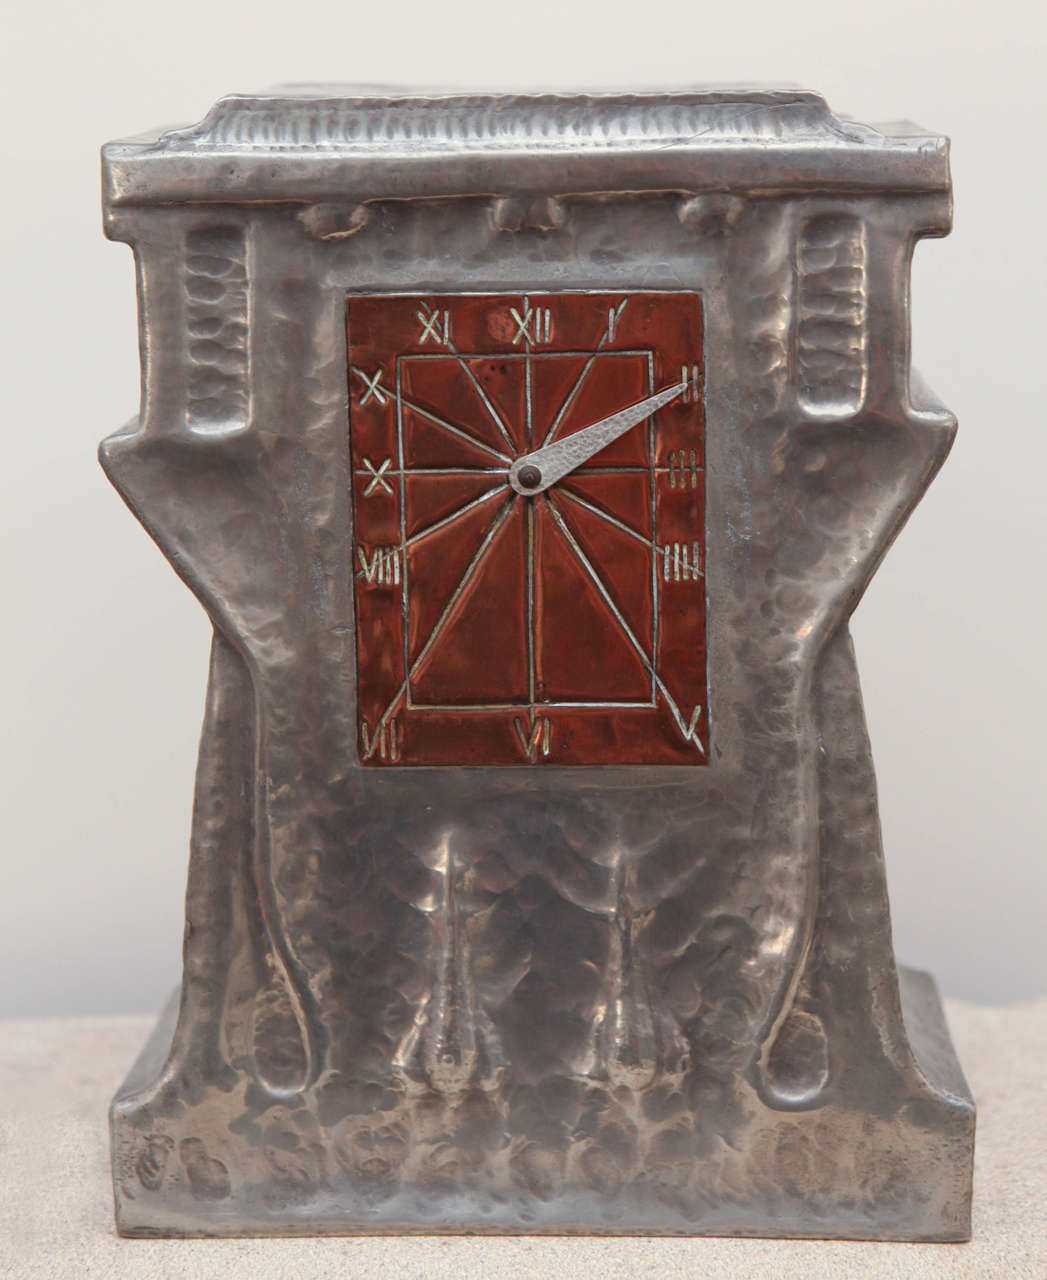 Liberty & Co. hand-wrought Tudric pewter clock with copper dial and roman numerals. Embossed on base, British, circa 1905

Original wind-up key included. Clock is in working condition.